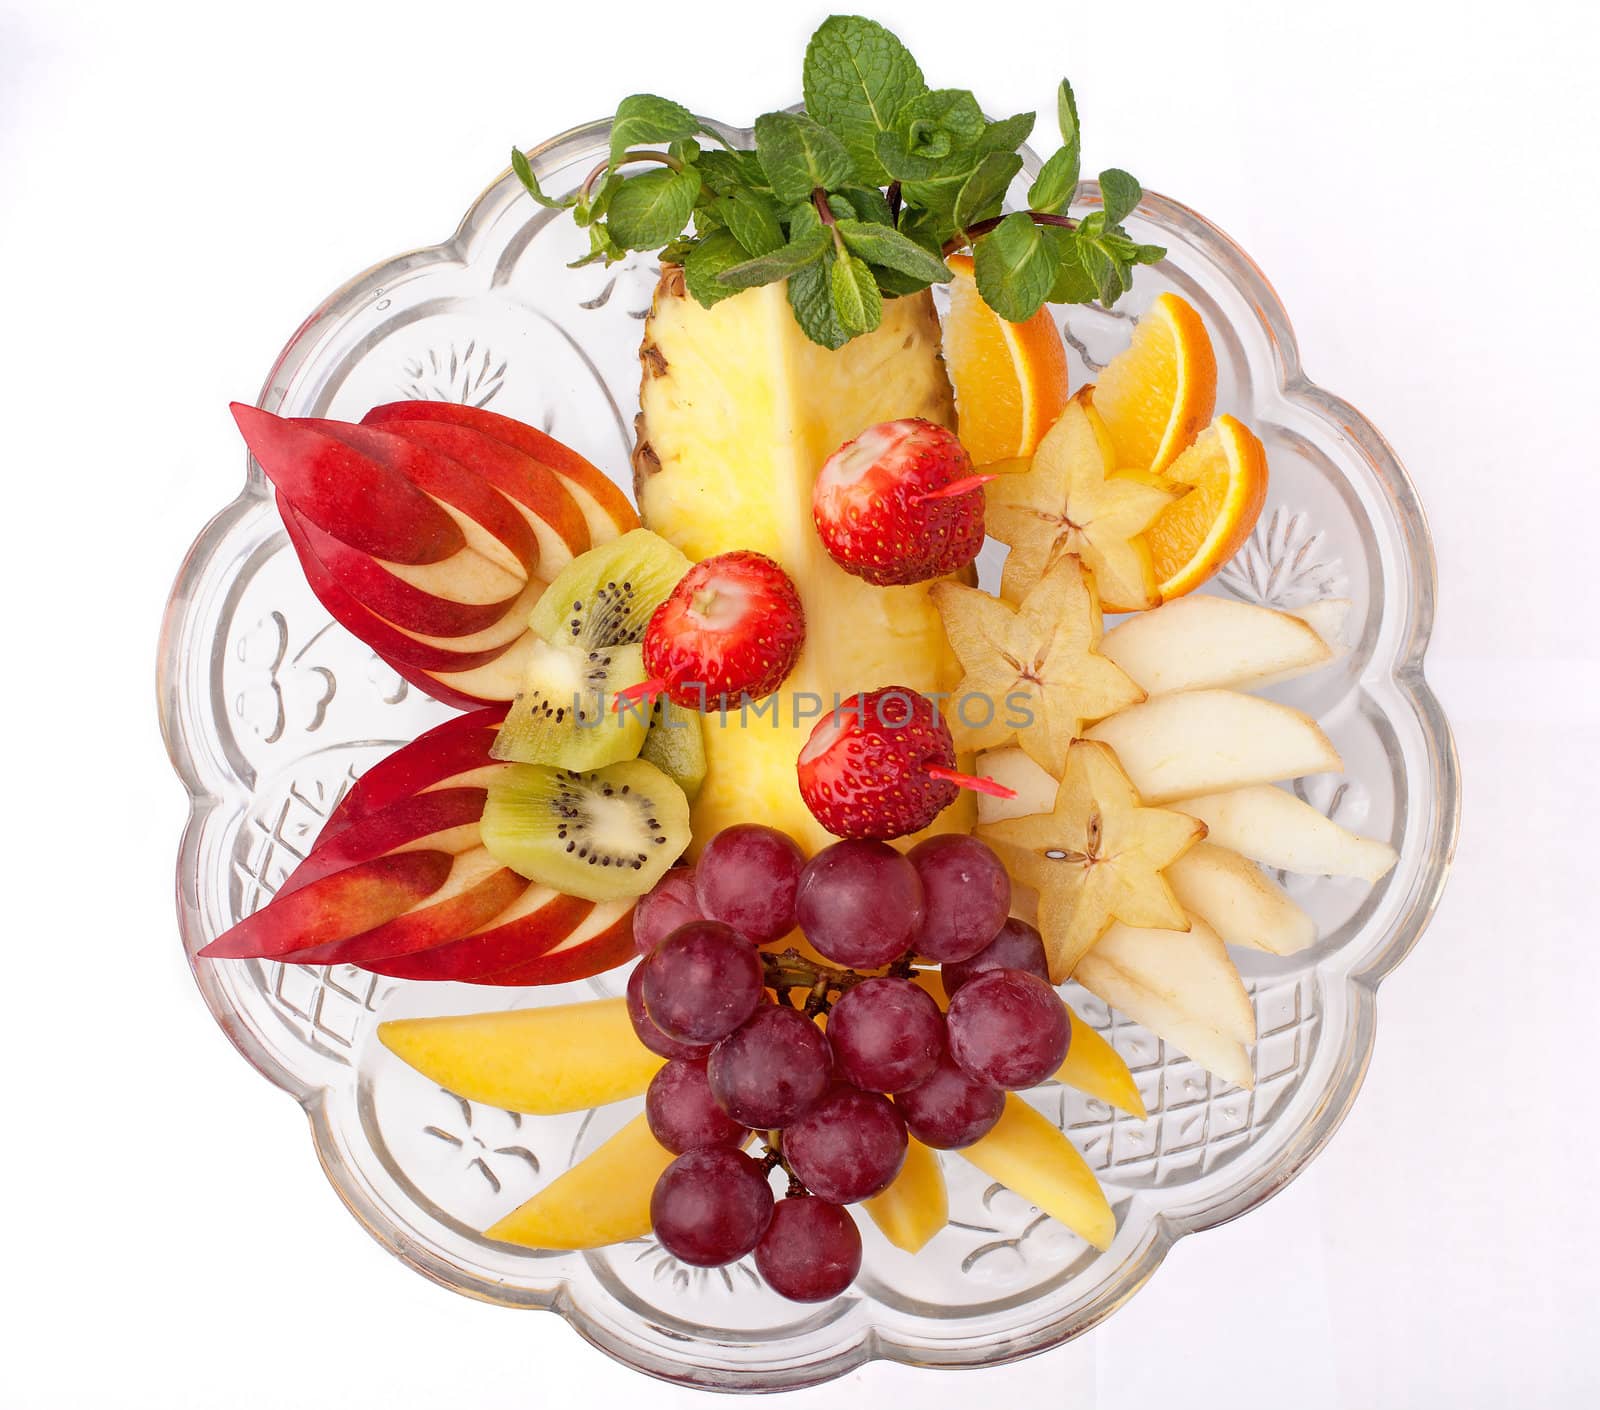 Dish with fruits and berries by IuraAtom